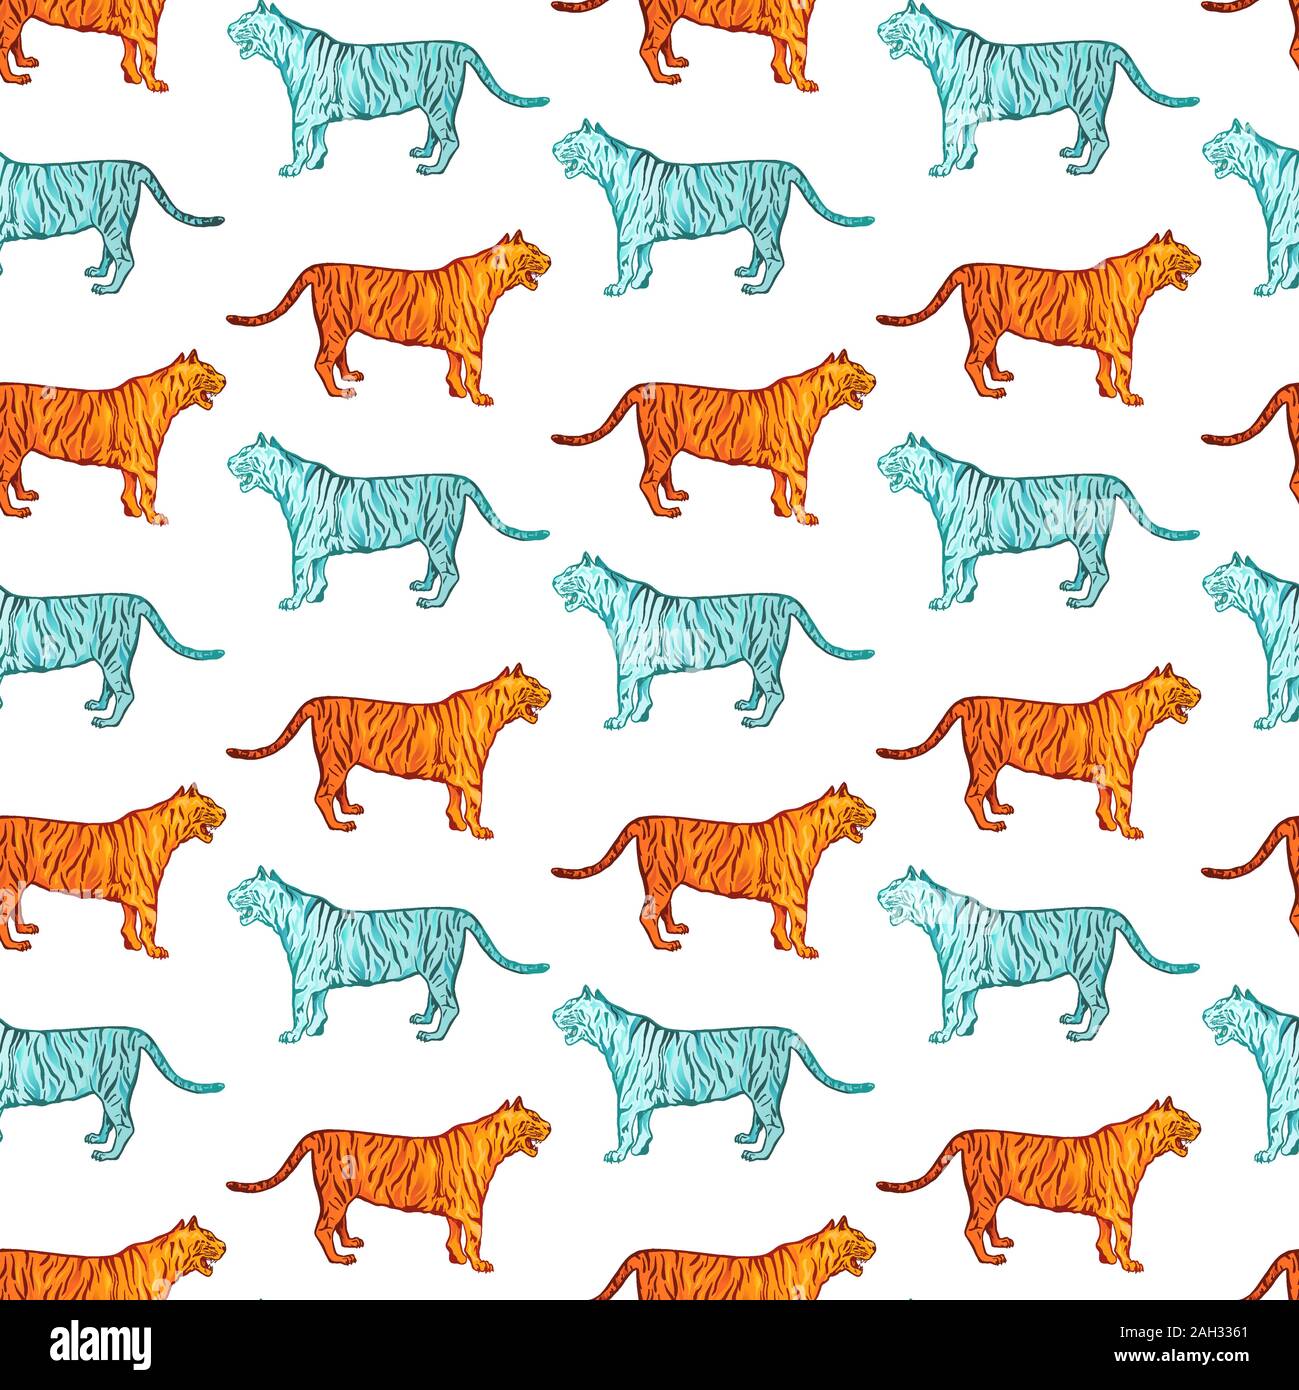 Wild tigers tribal style seamless pattern. Circus or zoo blue and orange wild cats. Exotic safari animals, jungle fauna tileable texture. Creative childish wallpaper, wrapping paper or textile design Stock Vector